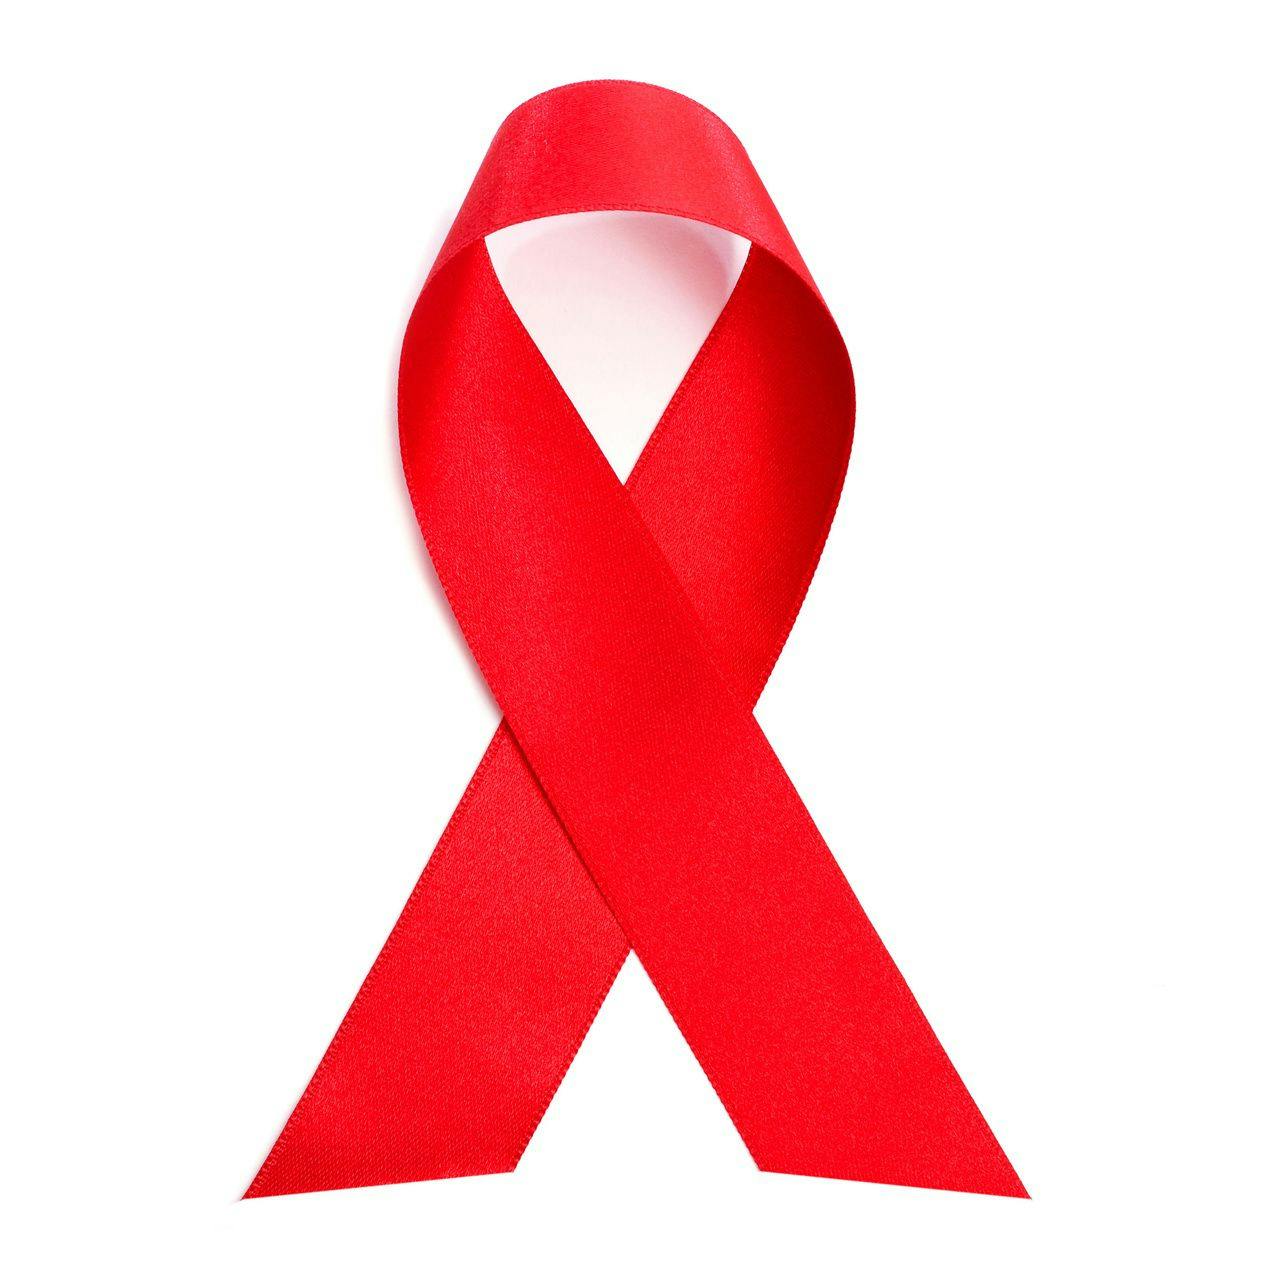 Survival Disadvantages Persist Among Persons With HIV